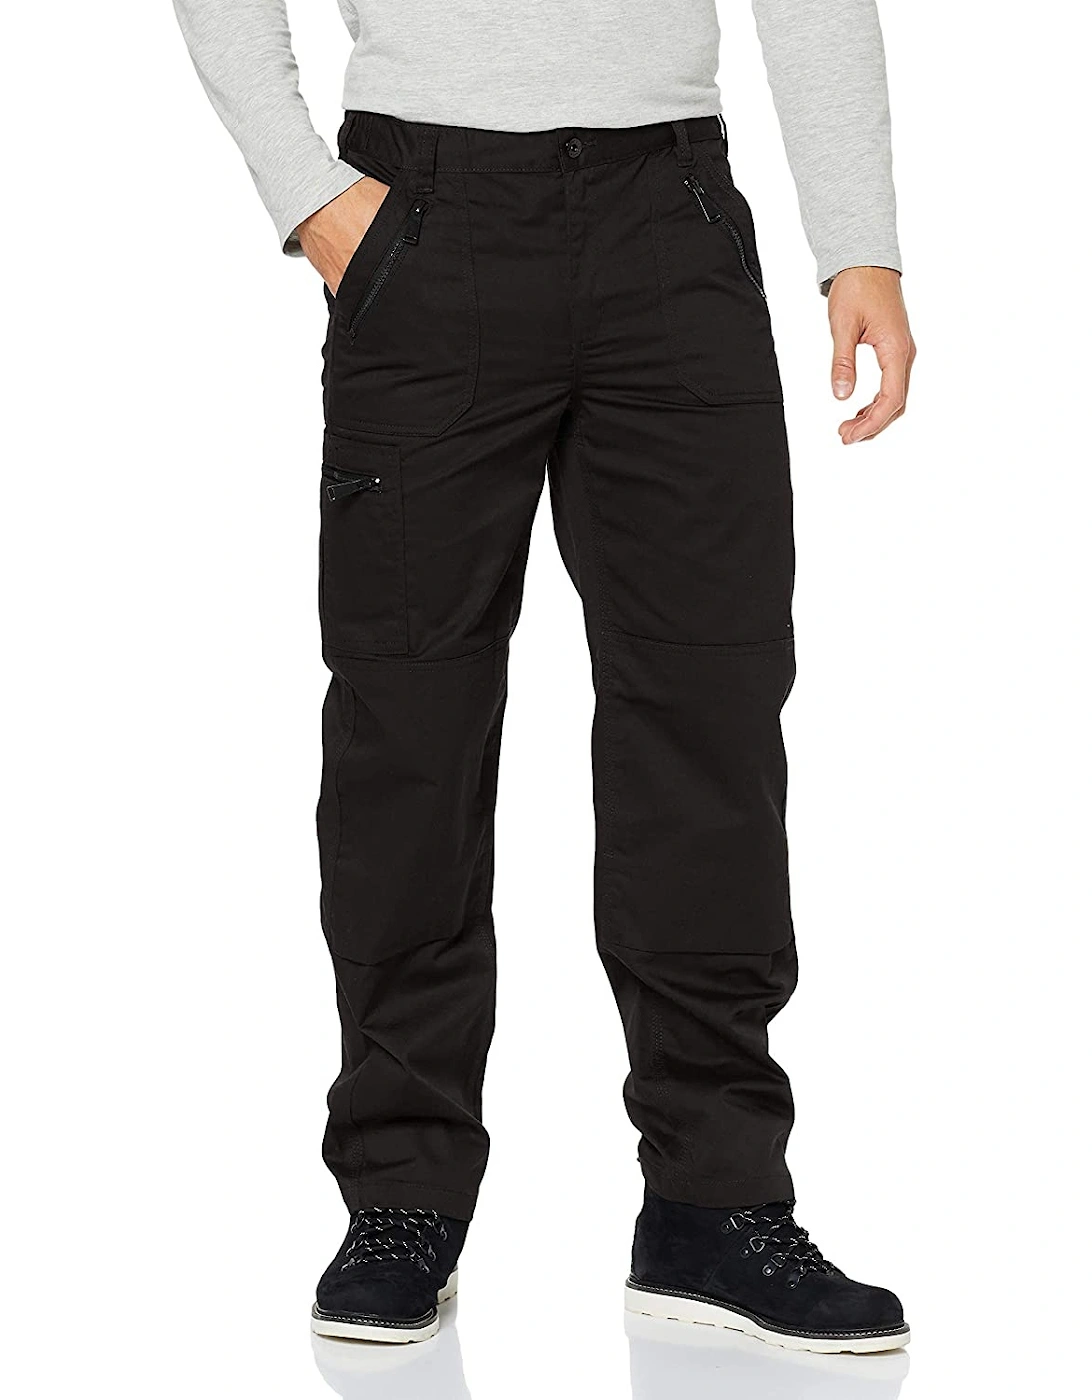 Mens Pro Action Trousers